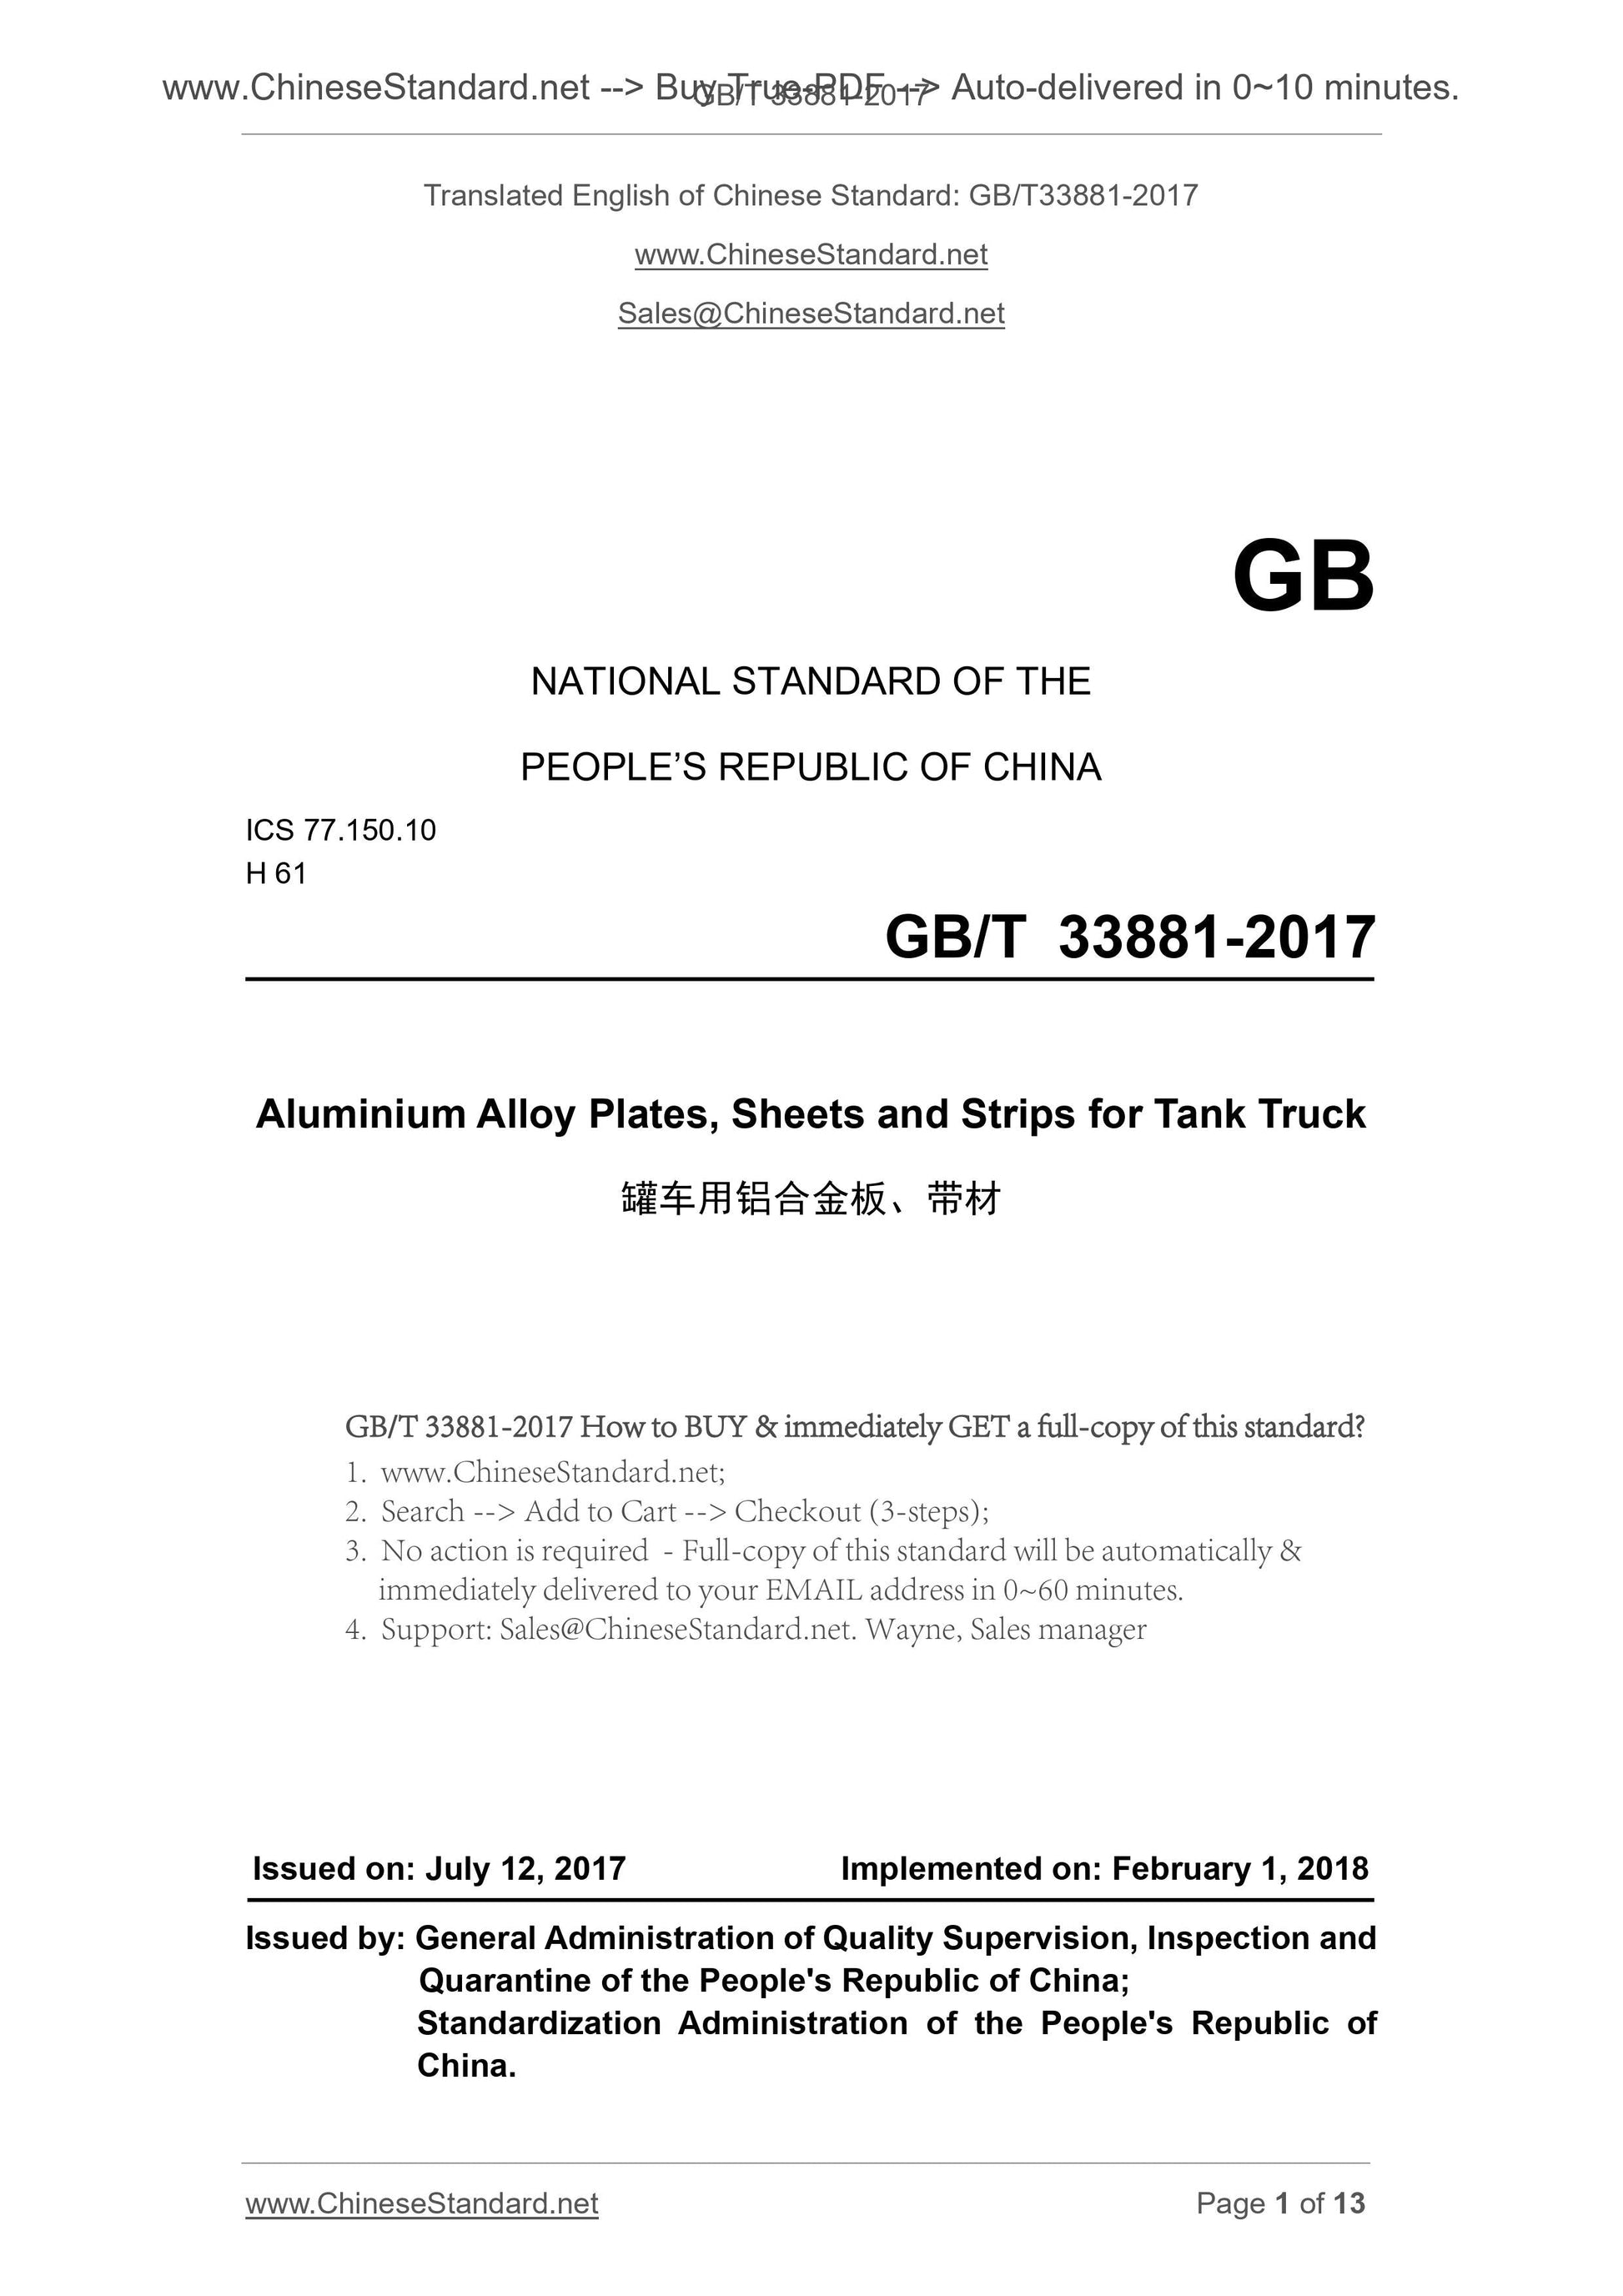 GB/T 33881-2017 Page 1